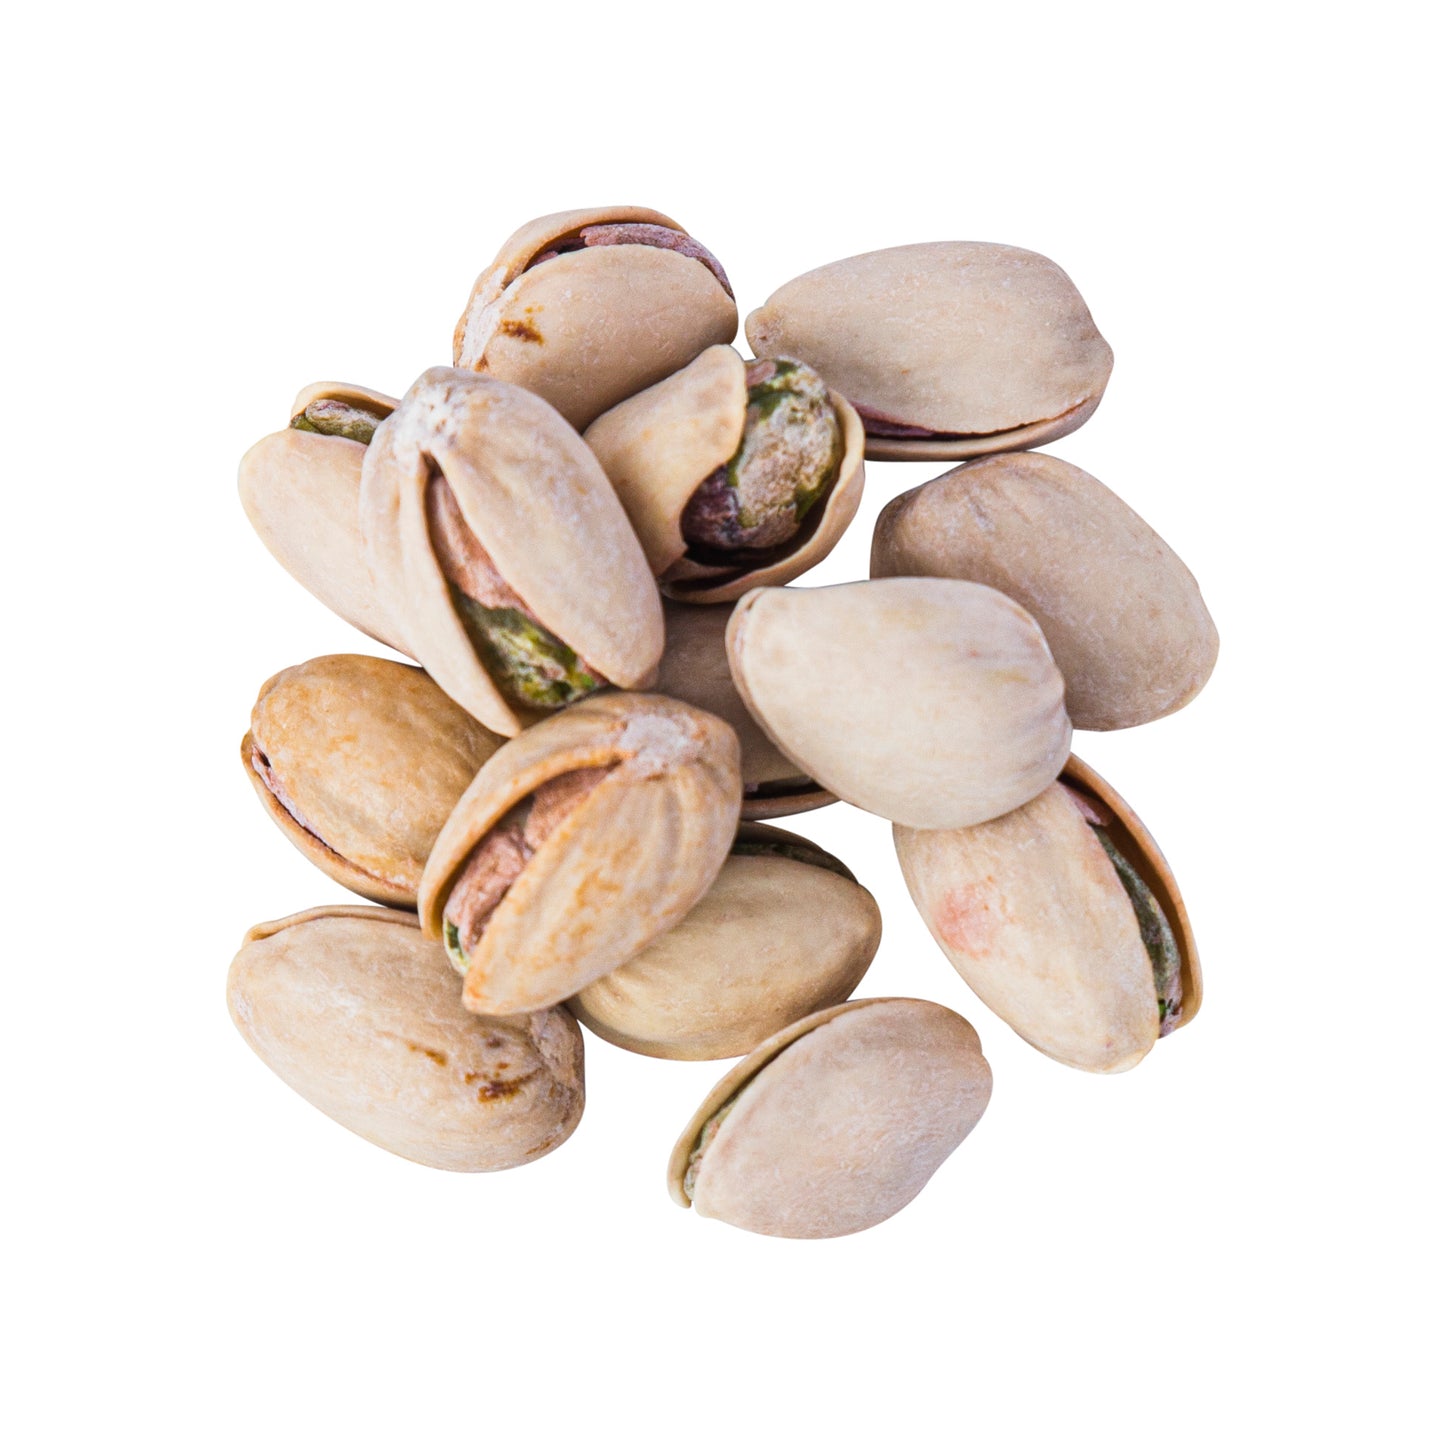 Pistachio Nuts Roasted Salted Organic - 2.5kg